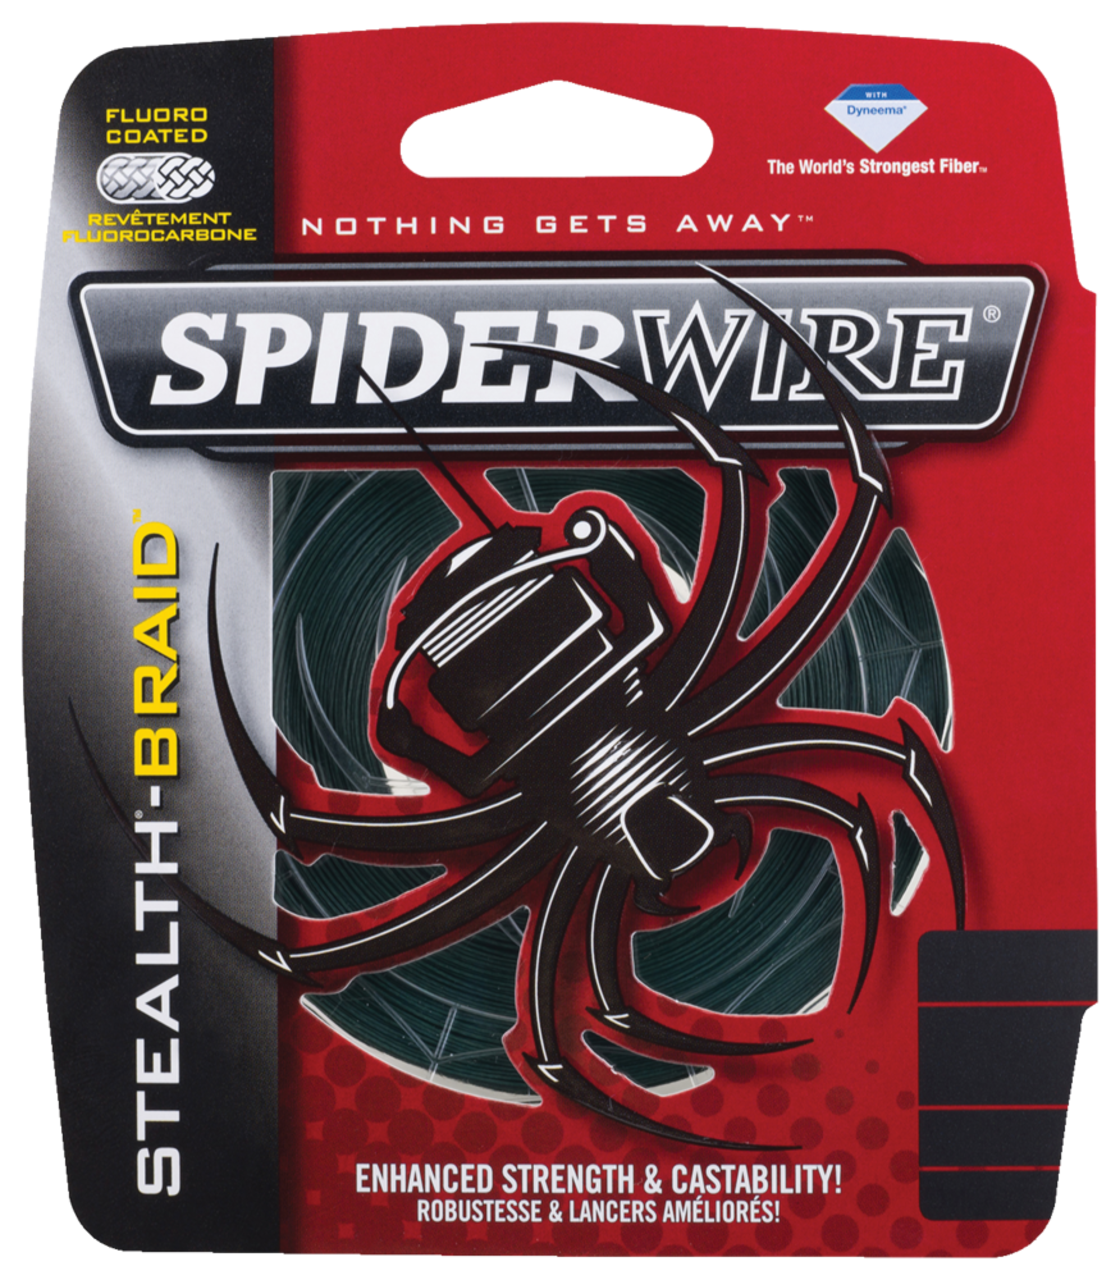 Spiderwire Stealth Smooth Casting Braided Fishing Line, Green